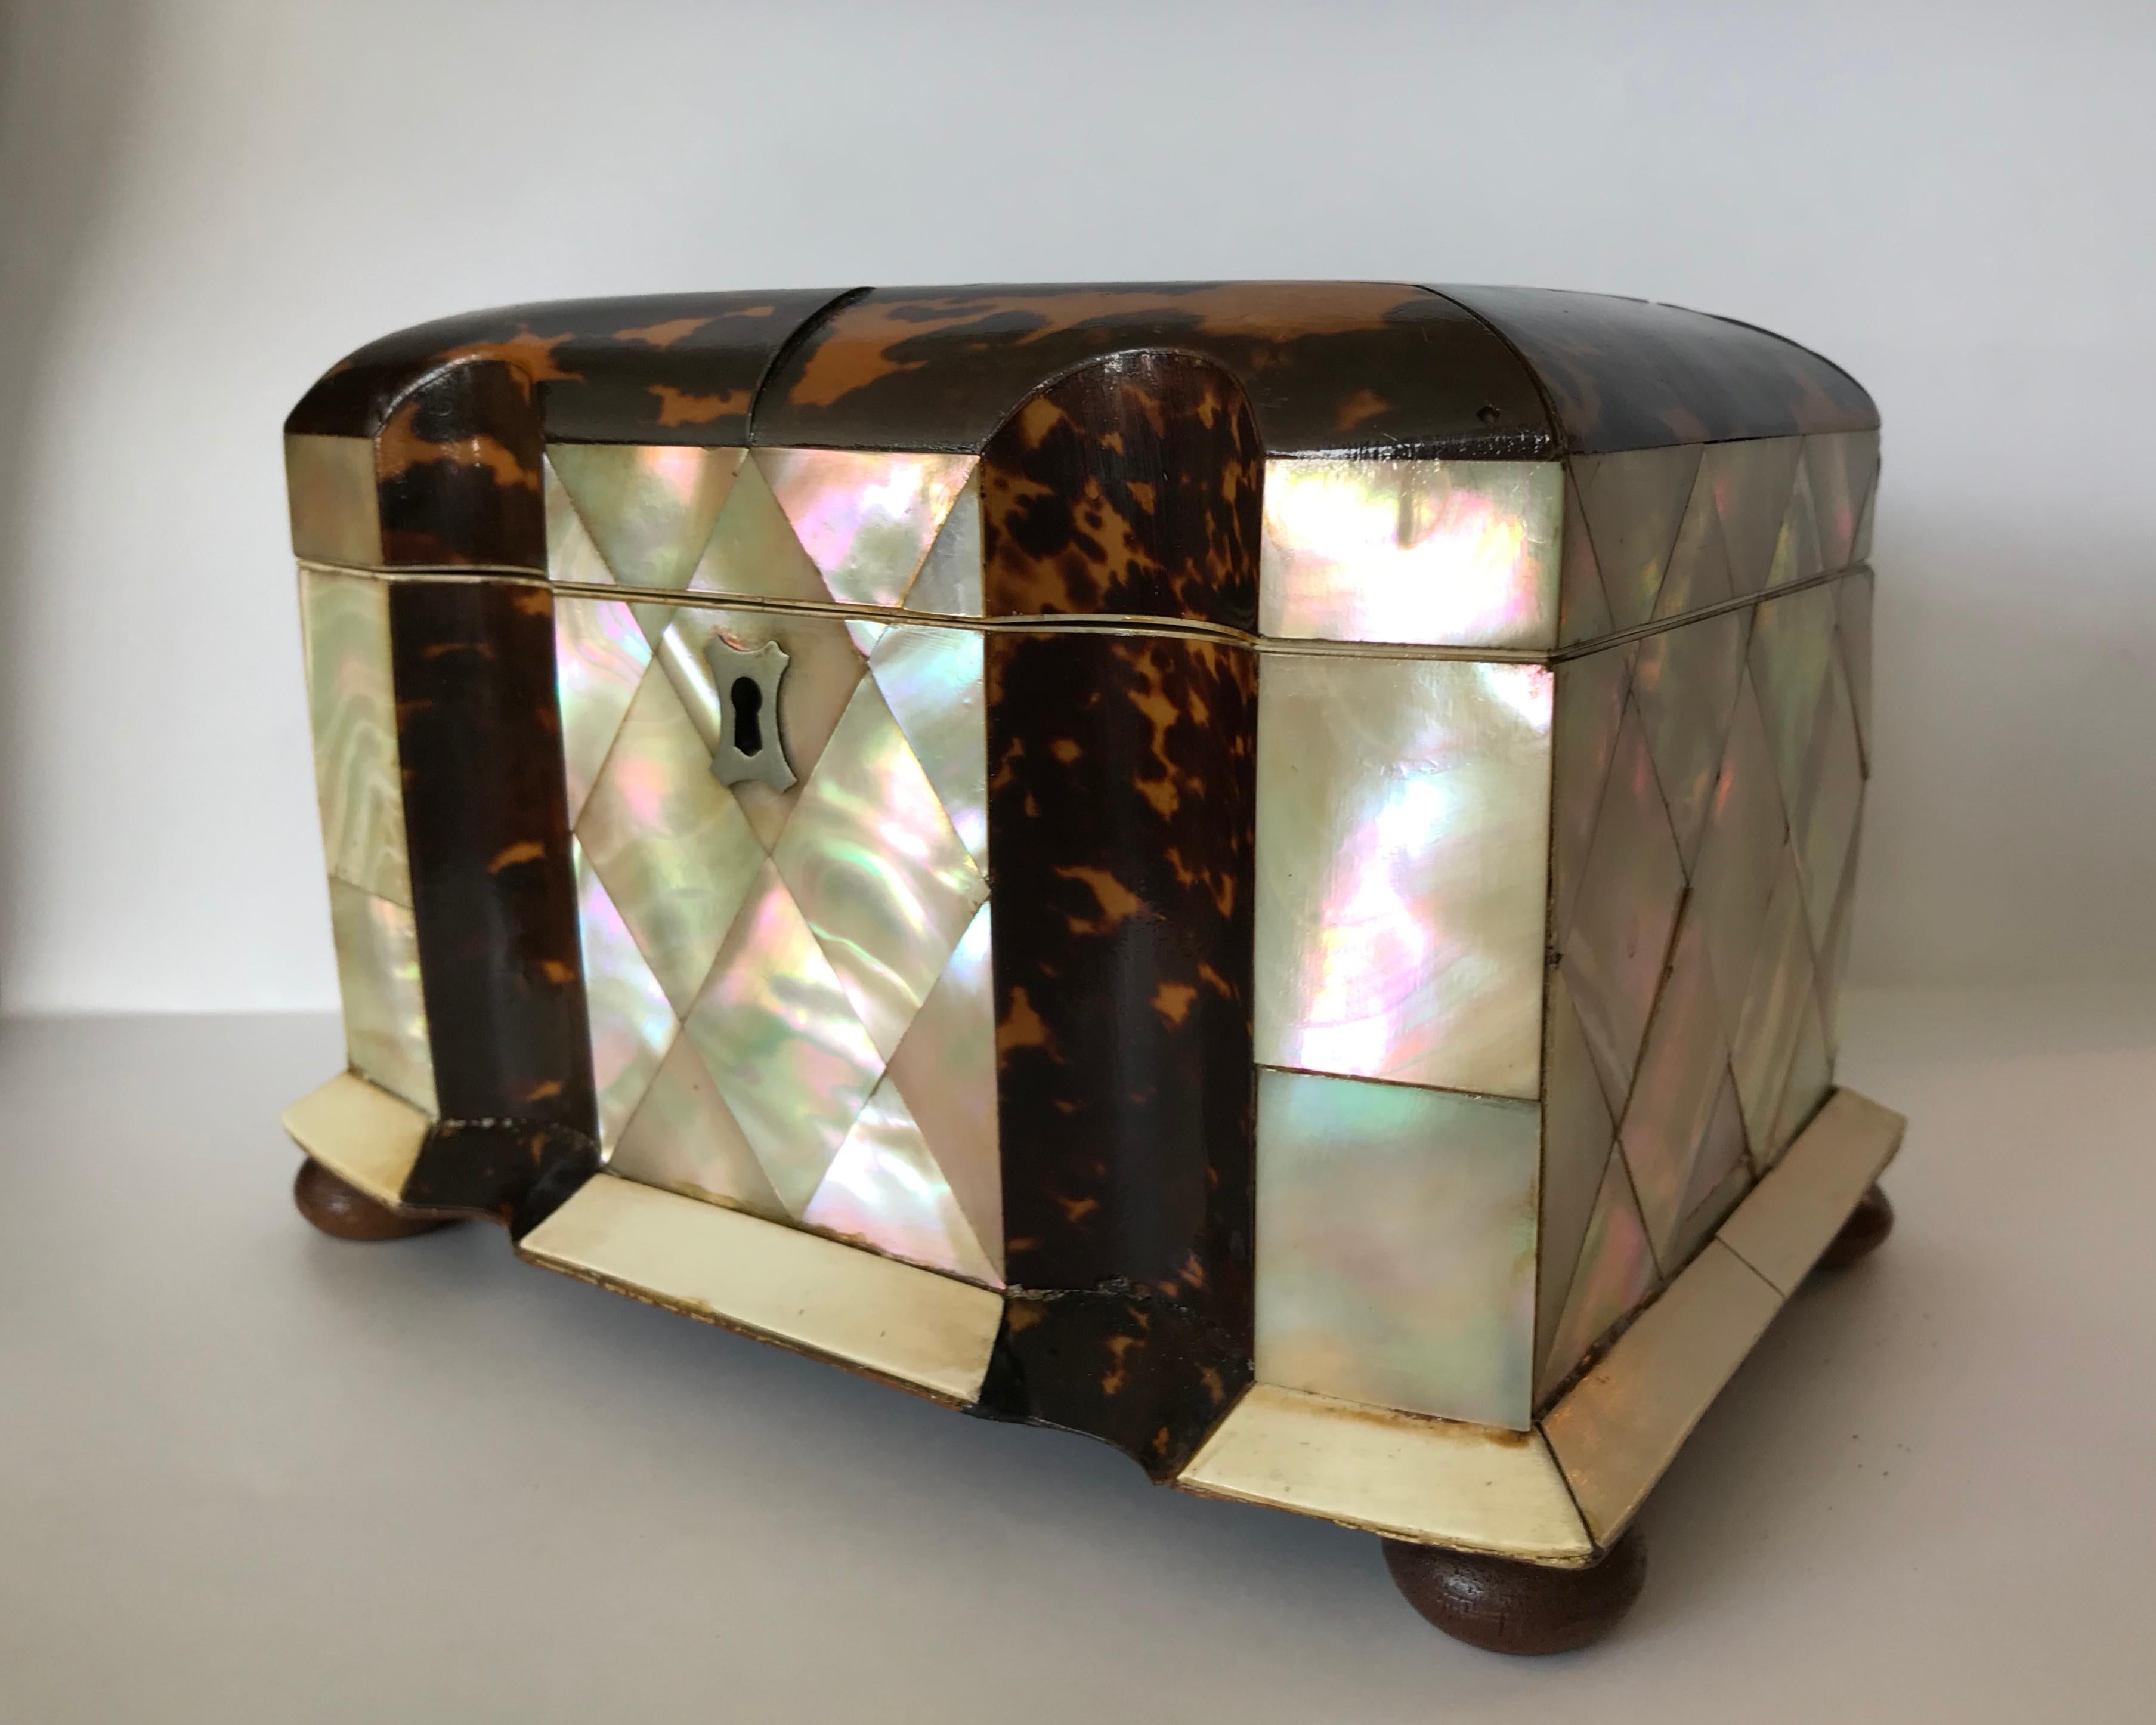 Stunning panels of mother of pearl accent this grand tea caddy.
The beautiful serpentine form makes this an unusual and superb caddy.